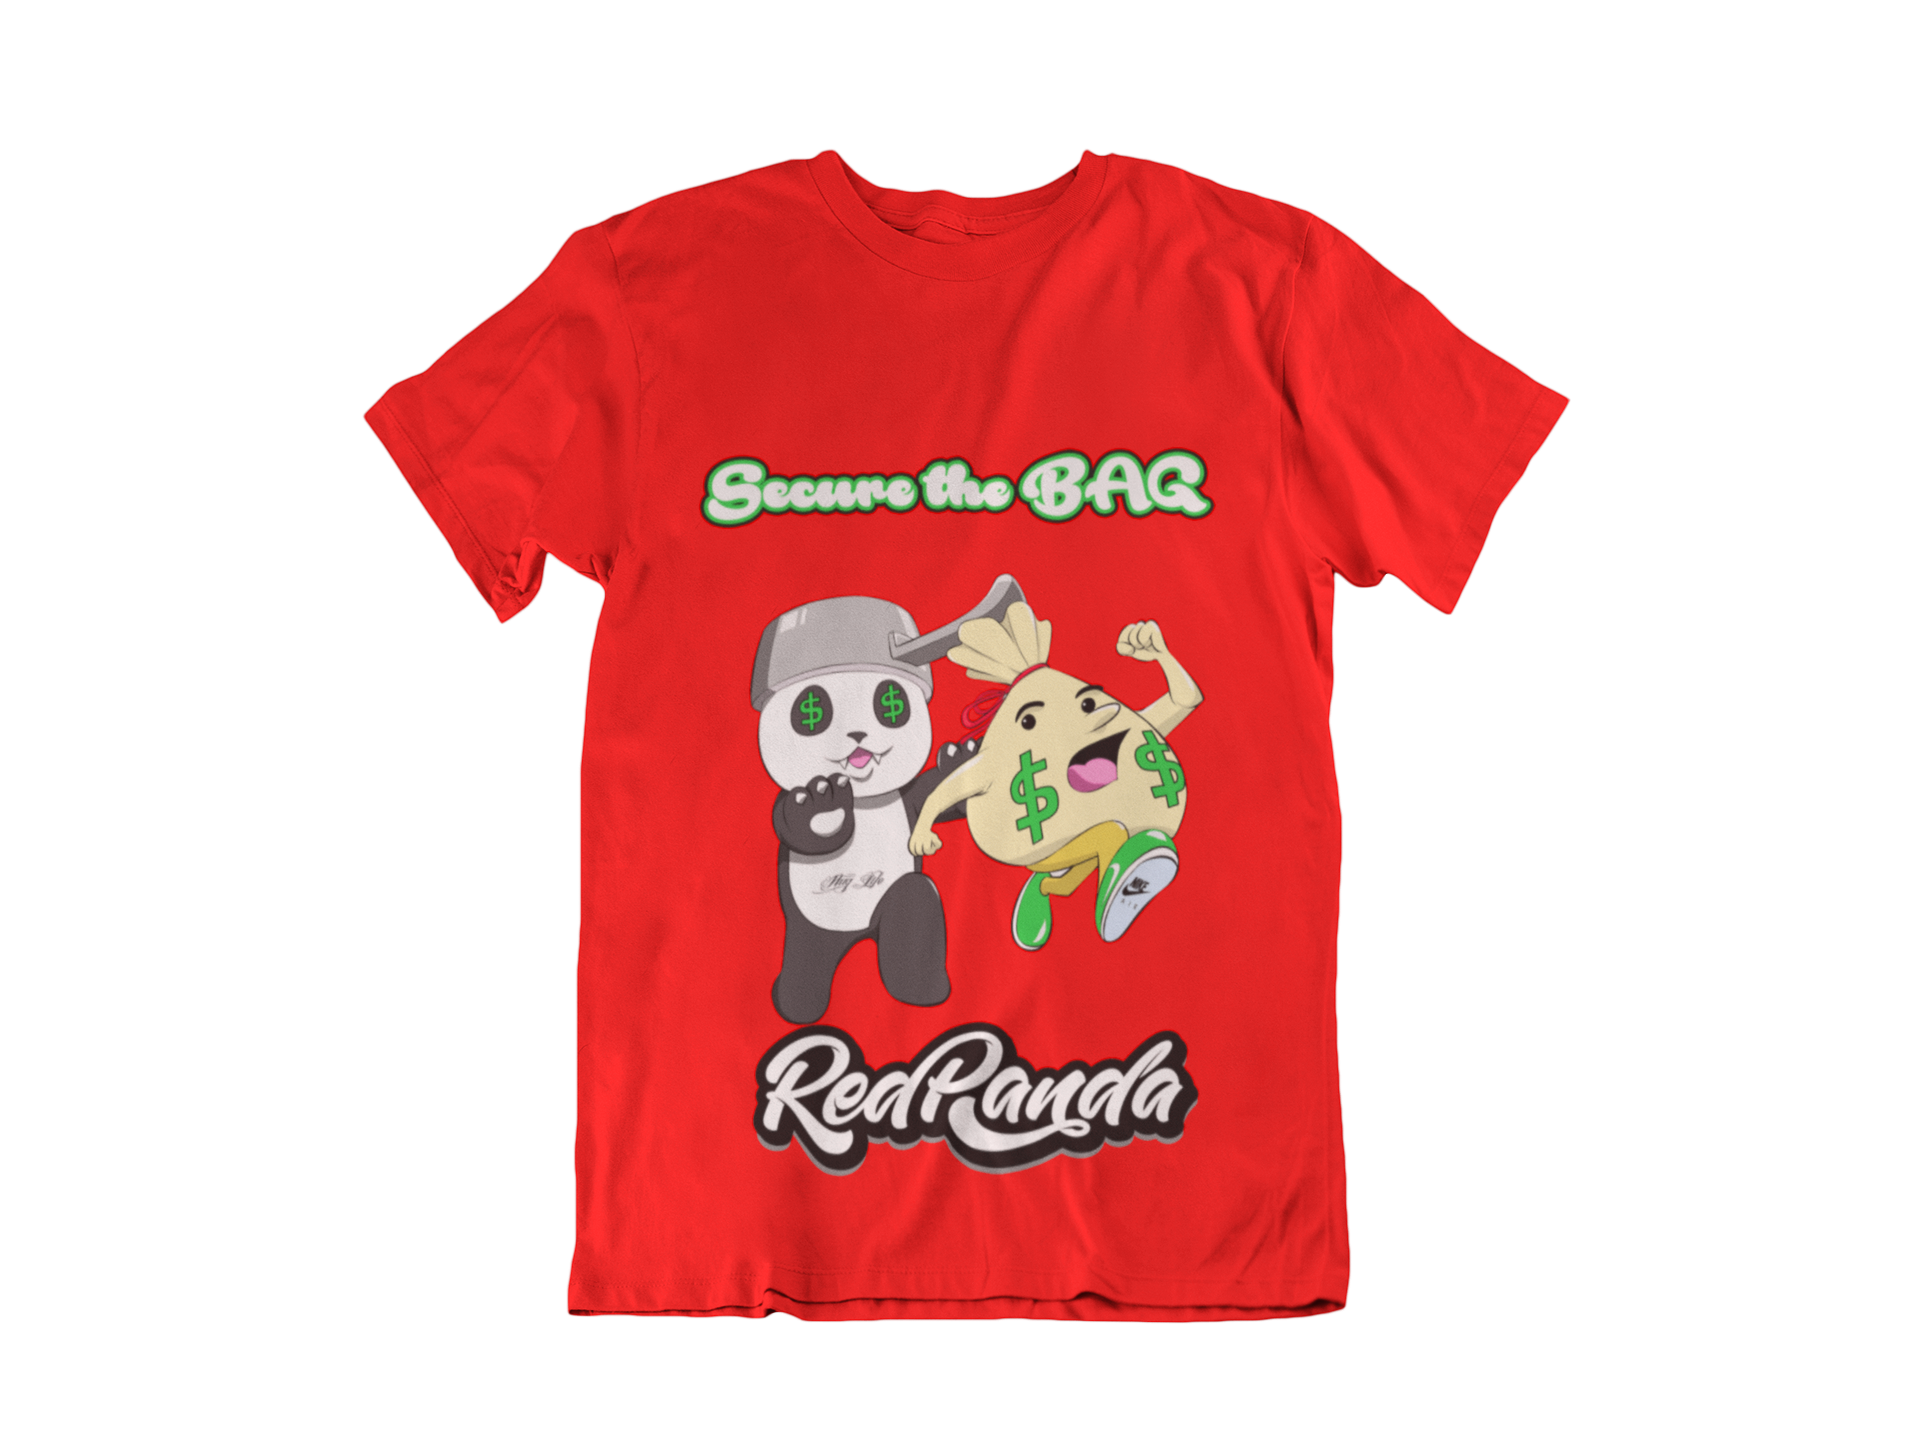 Secure the Bag (Red) Tee - Red Panda Clothing